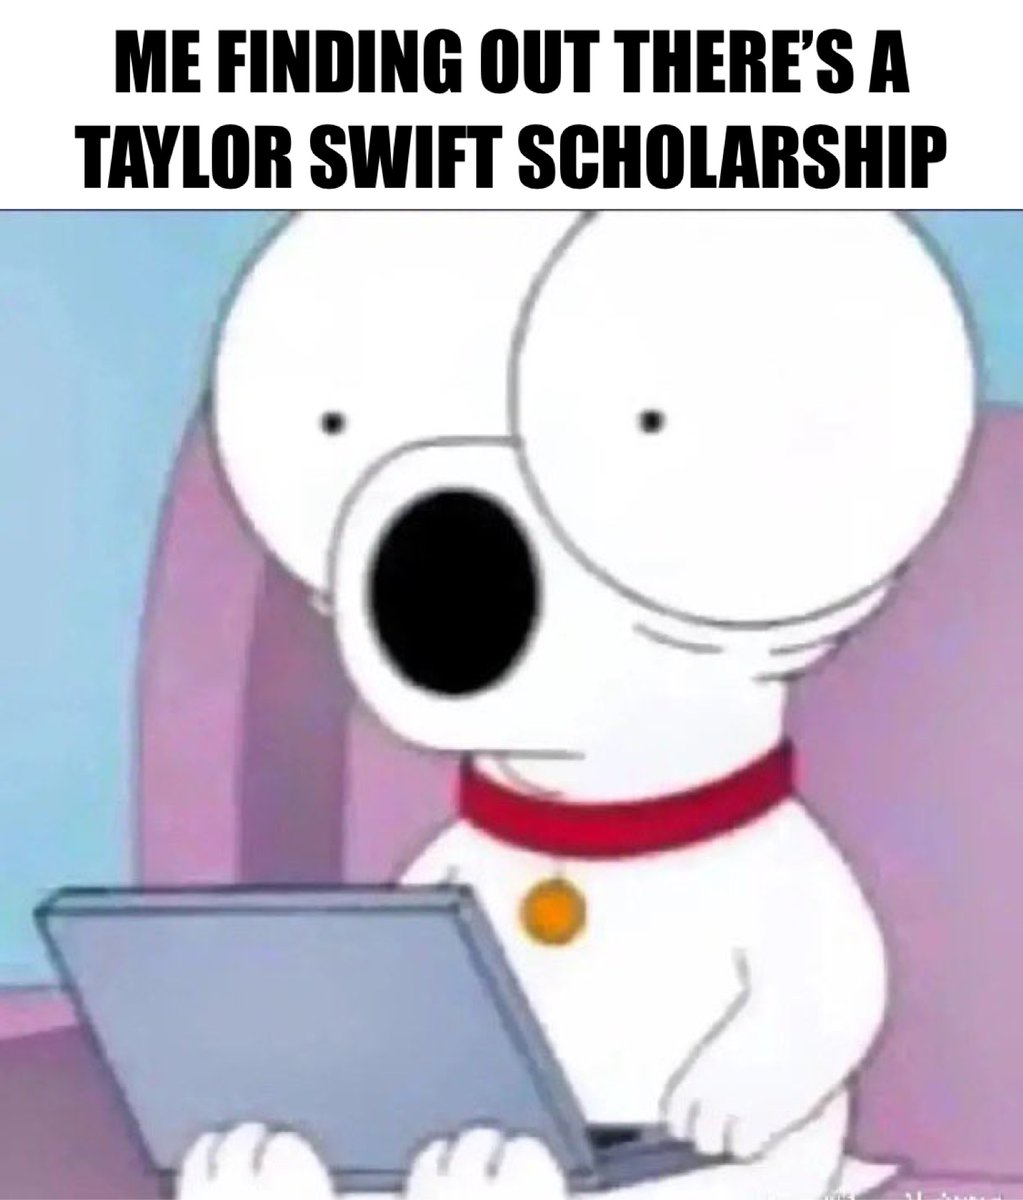 🔺 MyRedKite.com is a free to use scholarship search platform that you can personalize, Swiftie or not.

🔗Find this scholarship and more at myredkite.com/finaid/1989-ta… 

#Scholarship #college #collegelife #scholarships #seniors2024 #fafsa #scholarshipopportunities